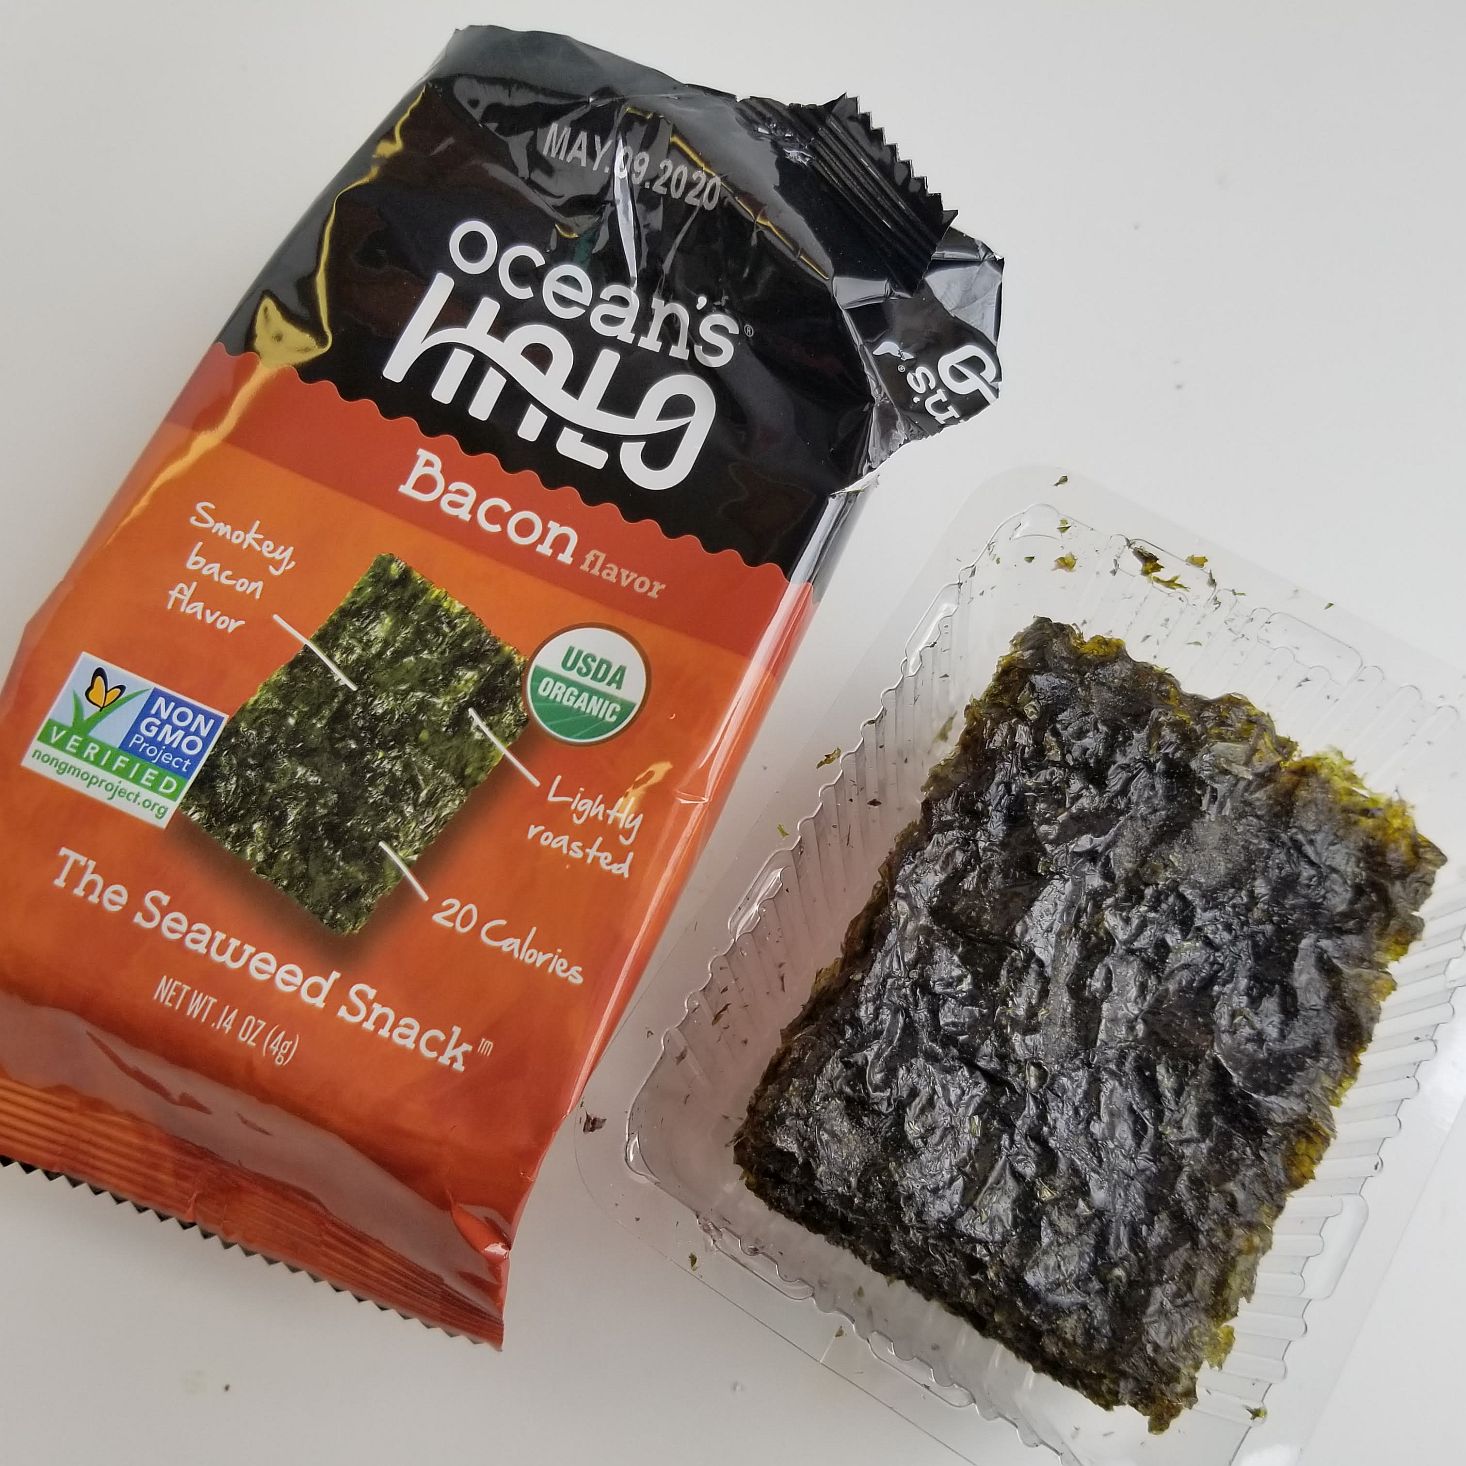 Snack Nation February 2020 seaweed open